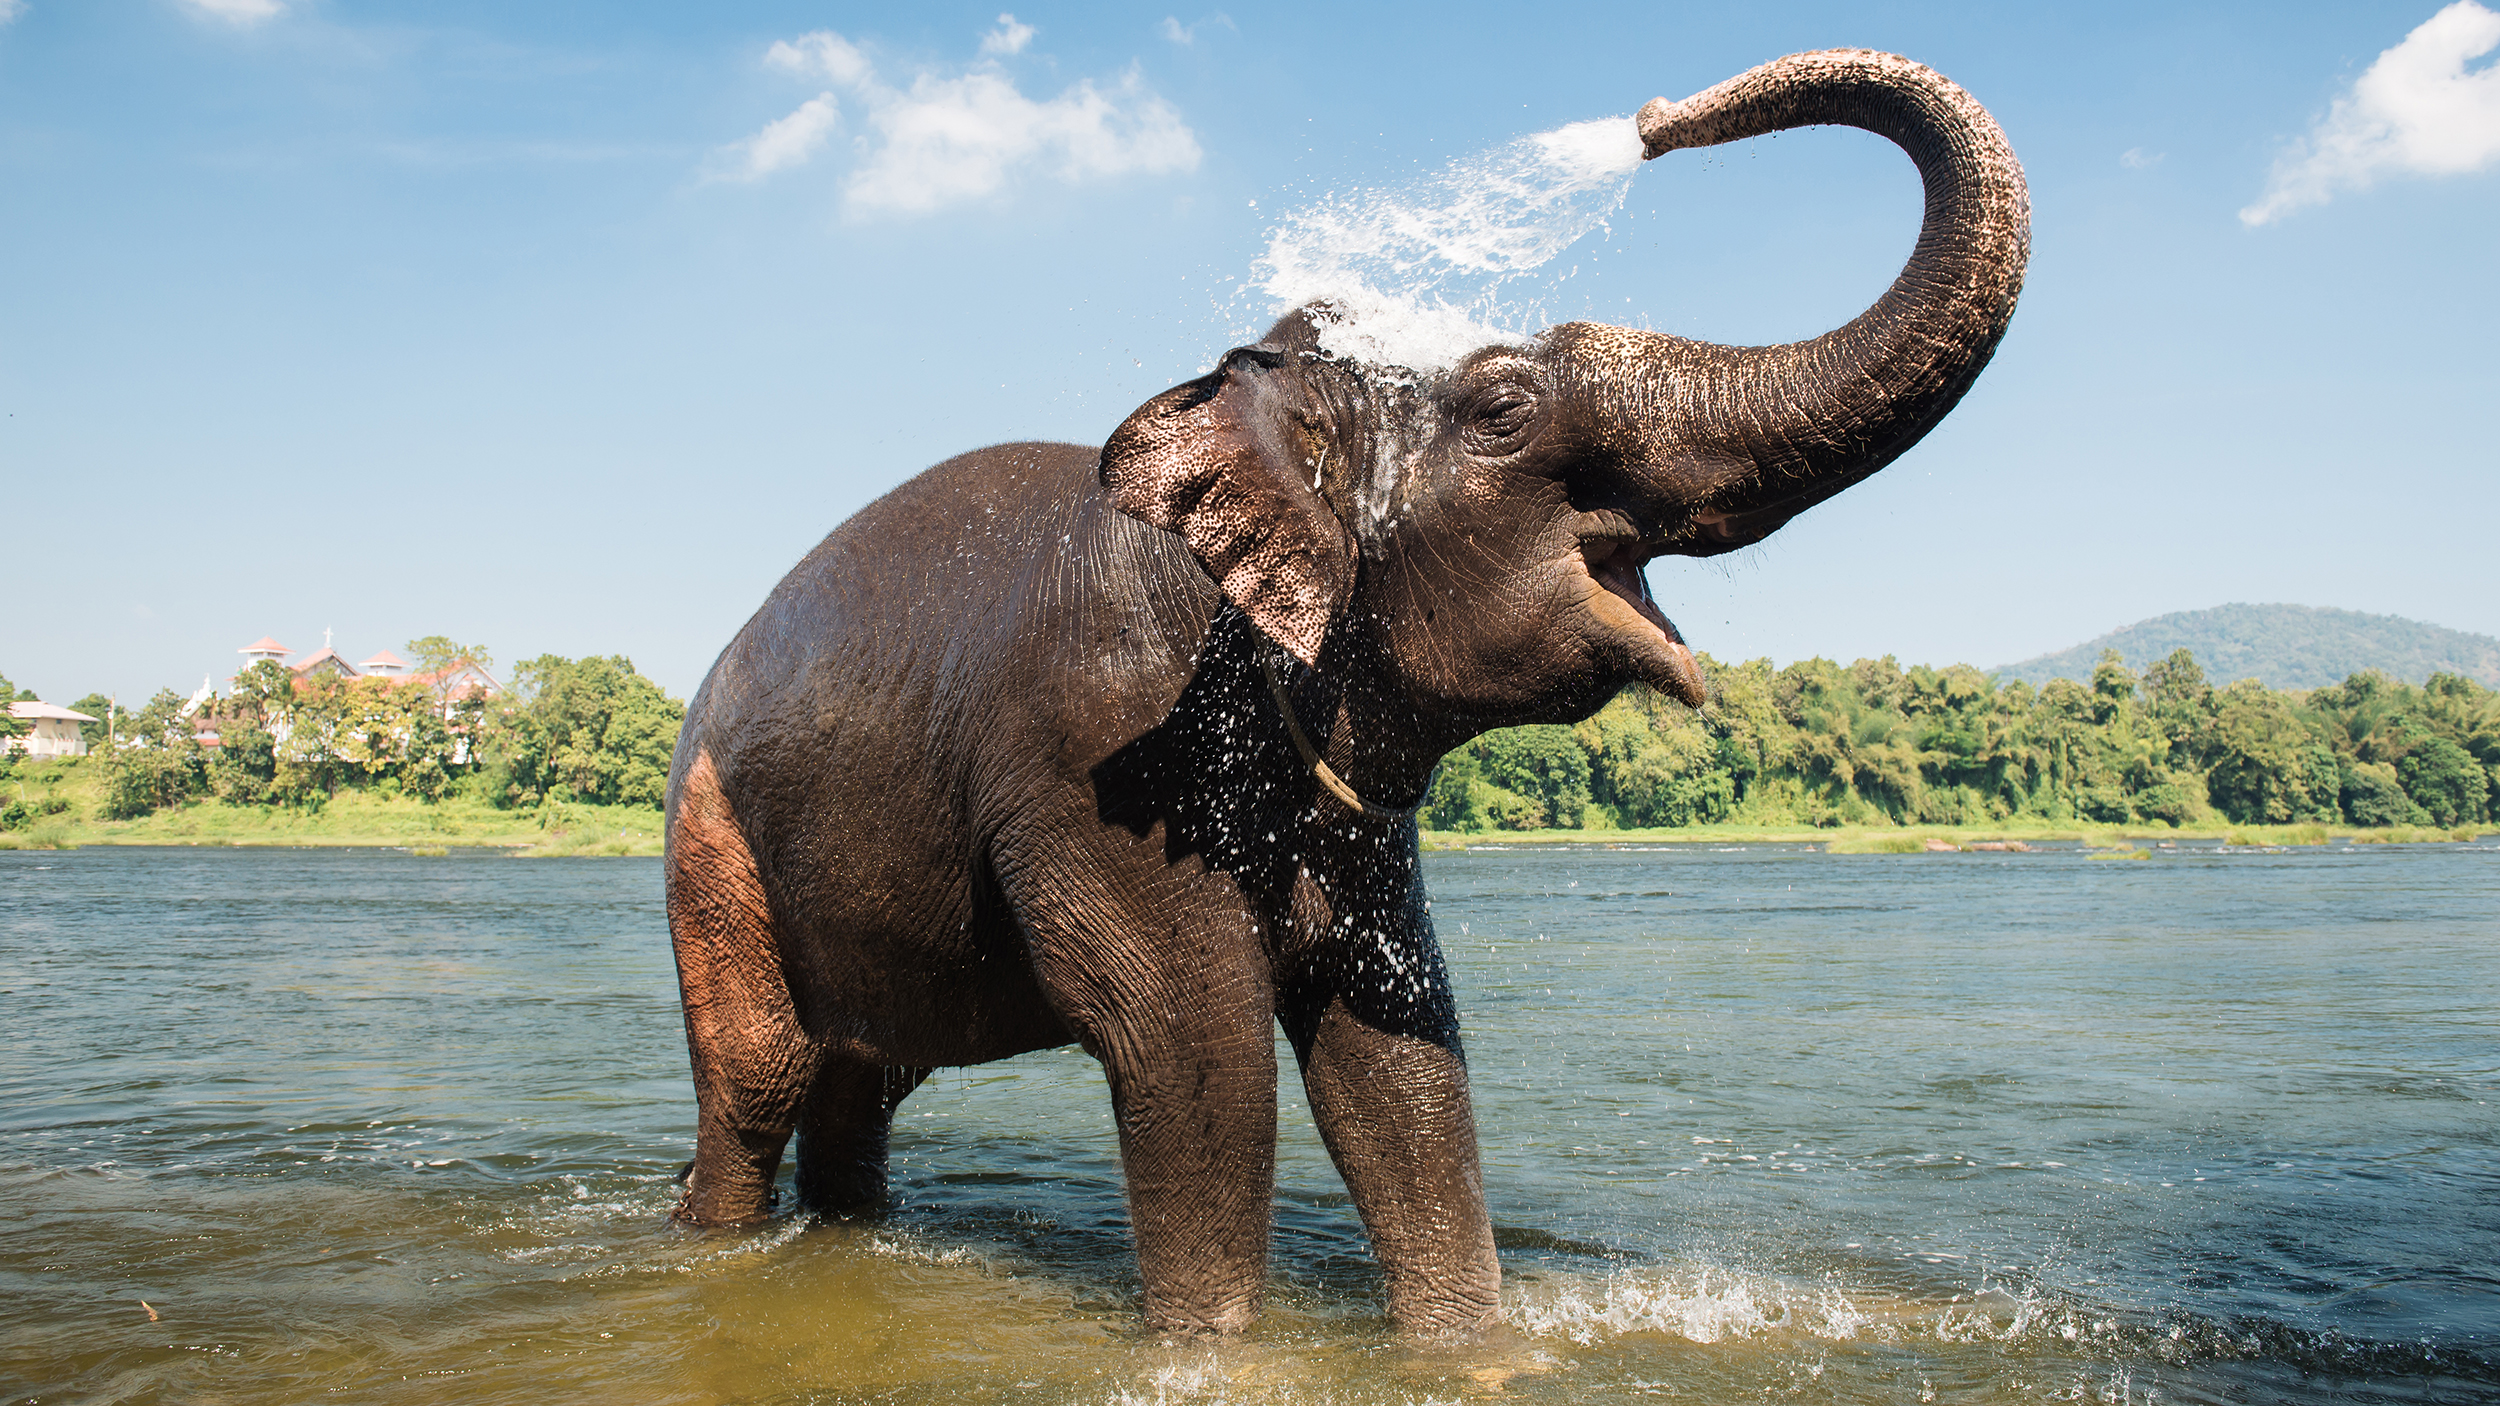 An elephant sprays itself with water in a river.